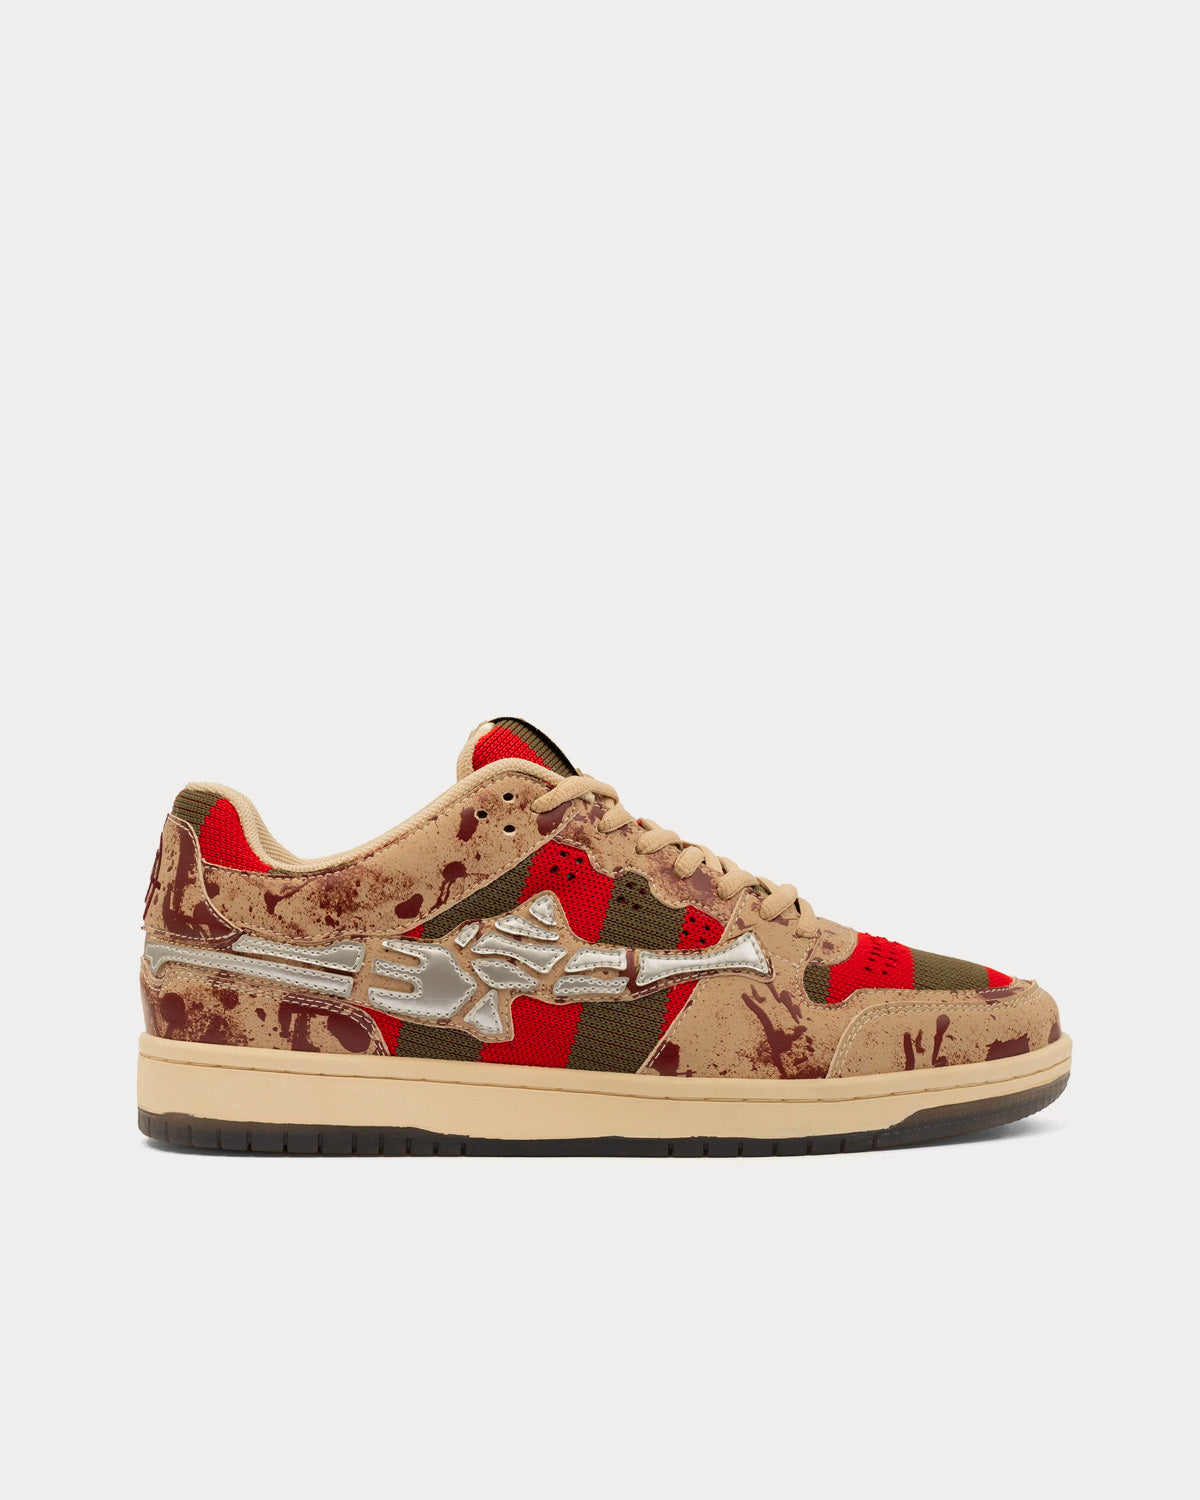 Vicinity - Akimbo Lows 'Bloody Low' Low Top Sneakers